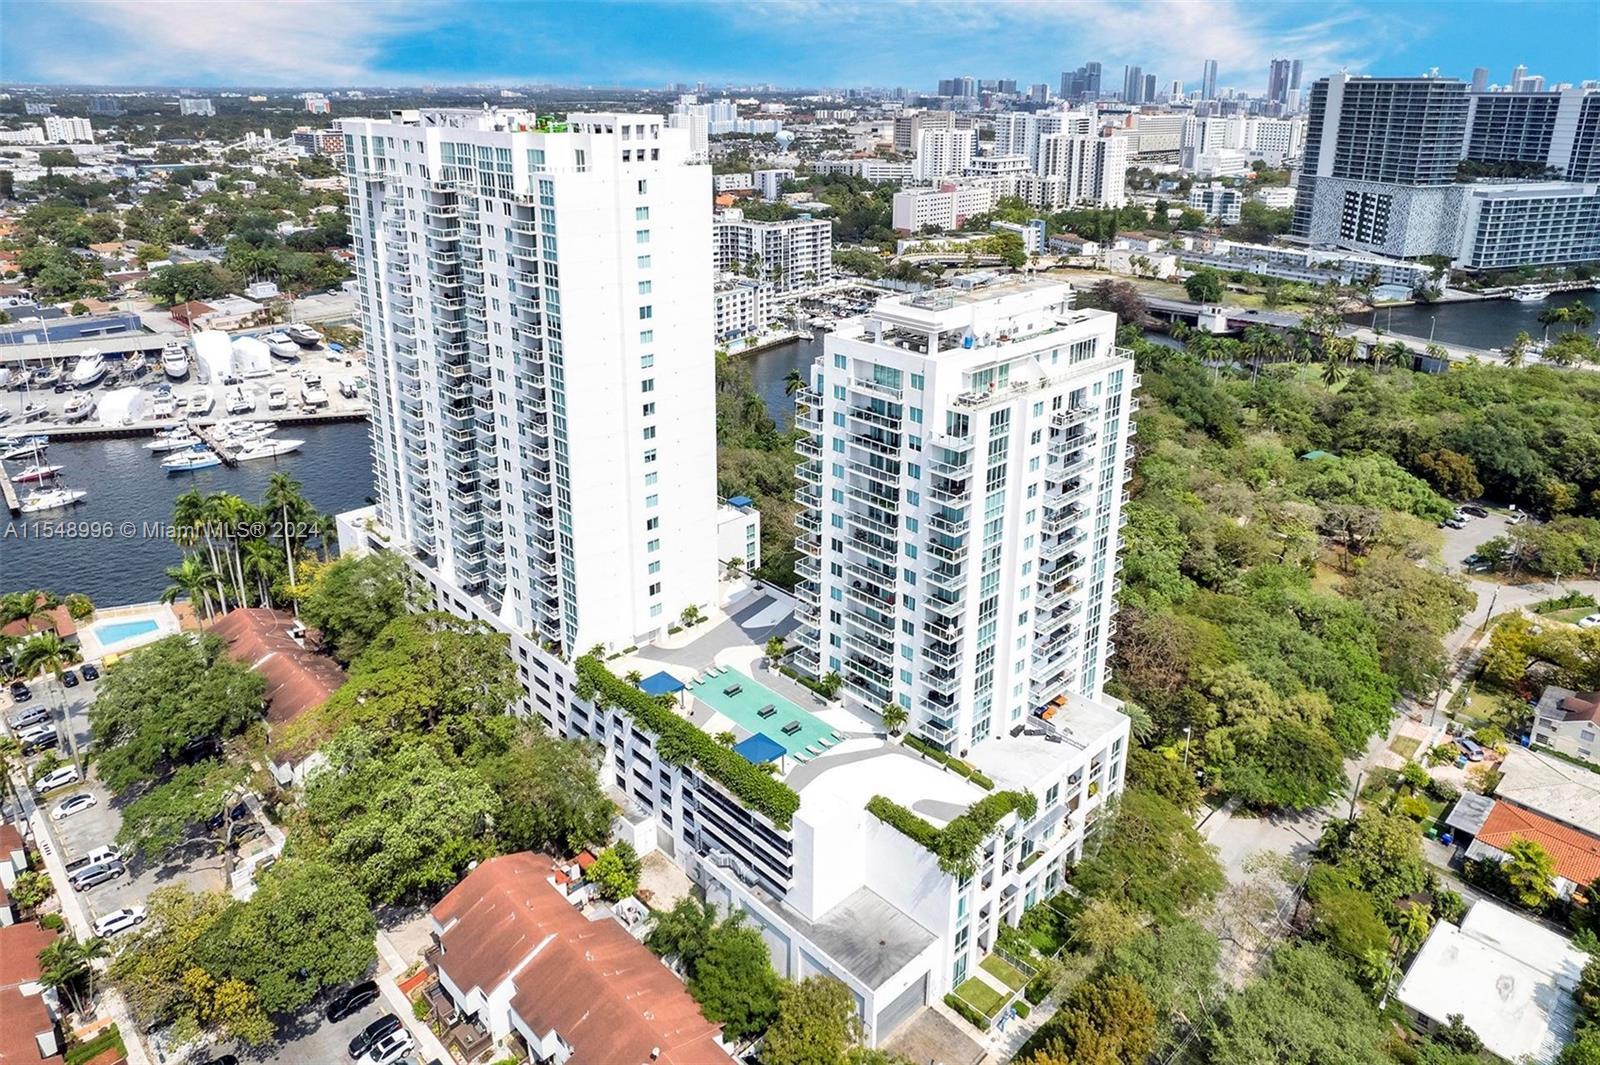 Photo of 1871 NW S River Dr #501 in Miami, FL